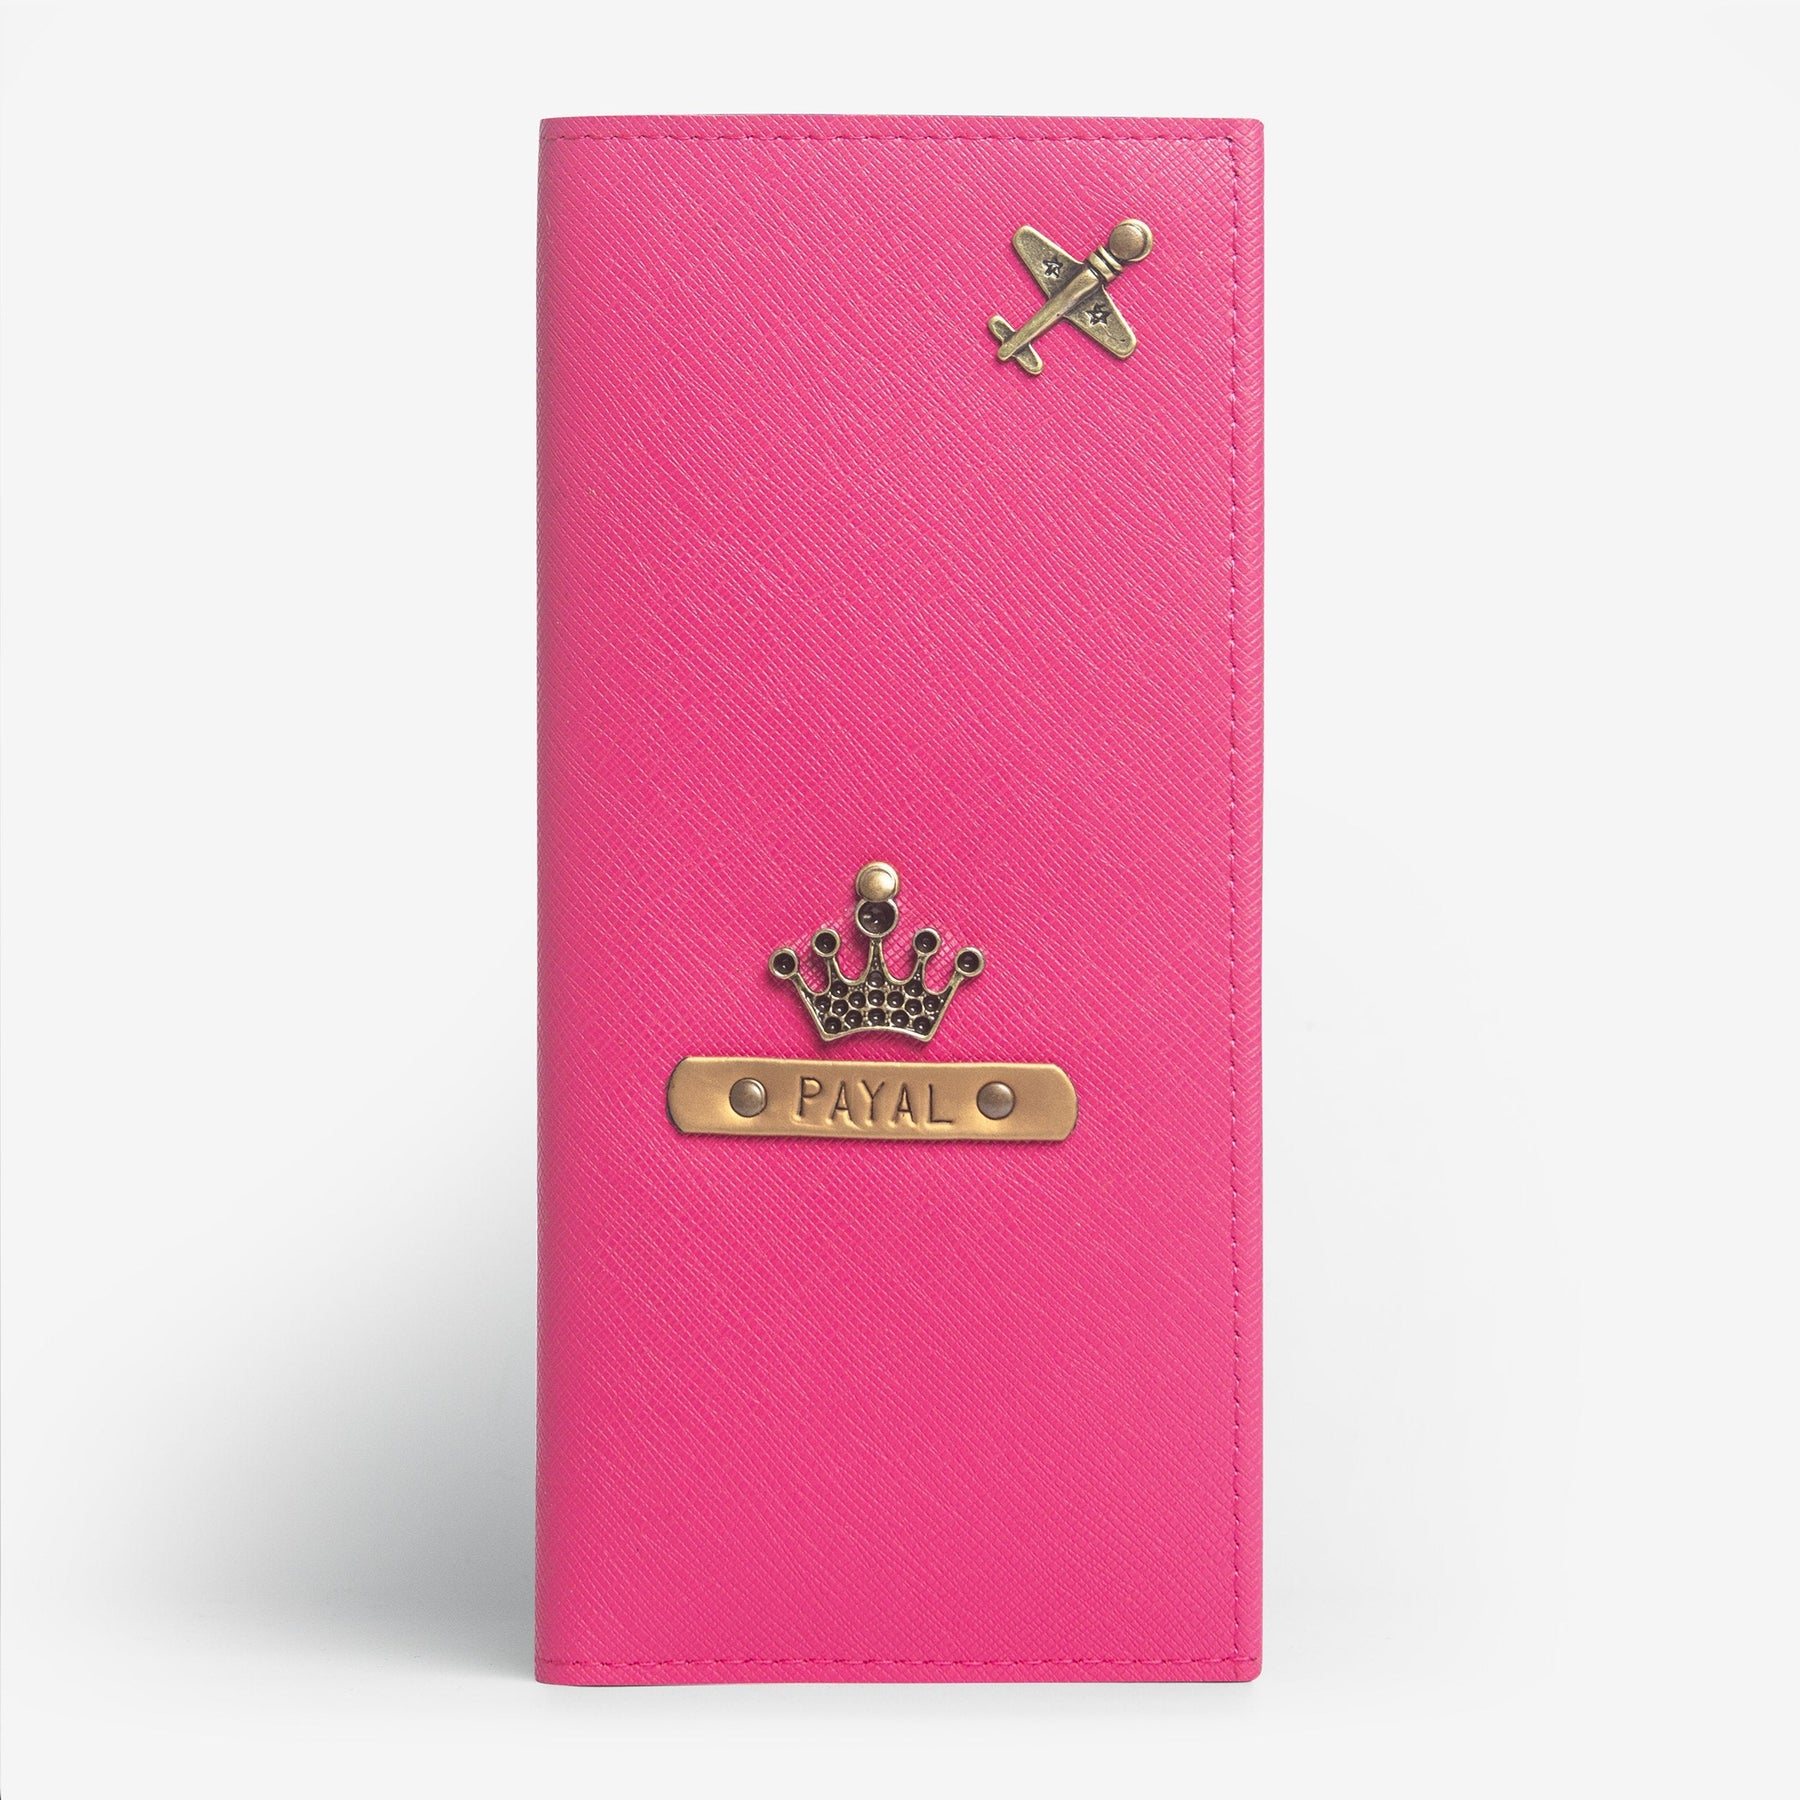 Personalized Travel Wallet - Pink